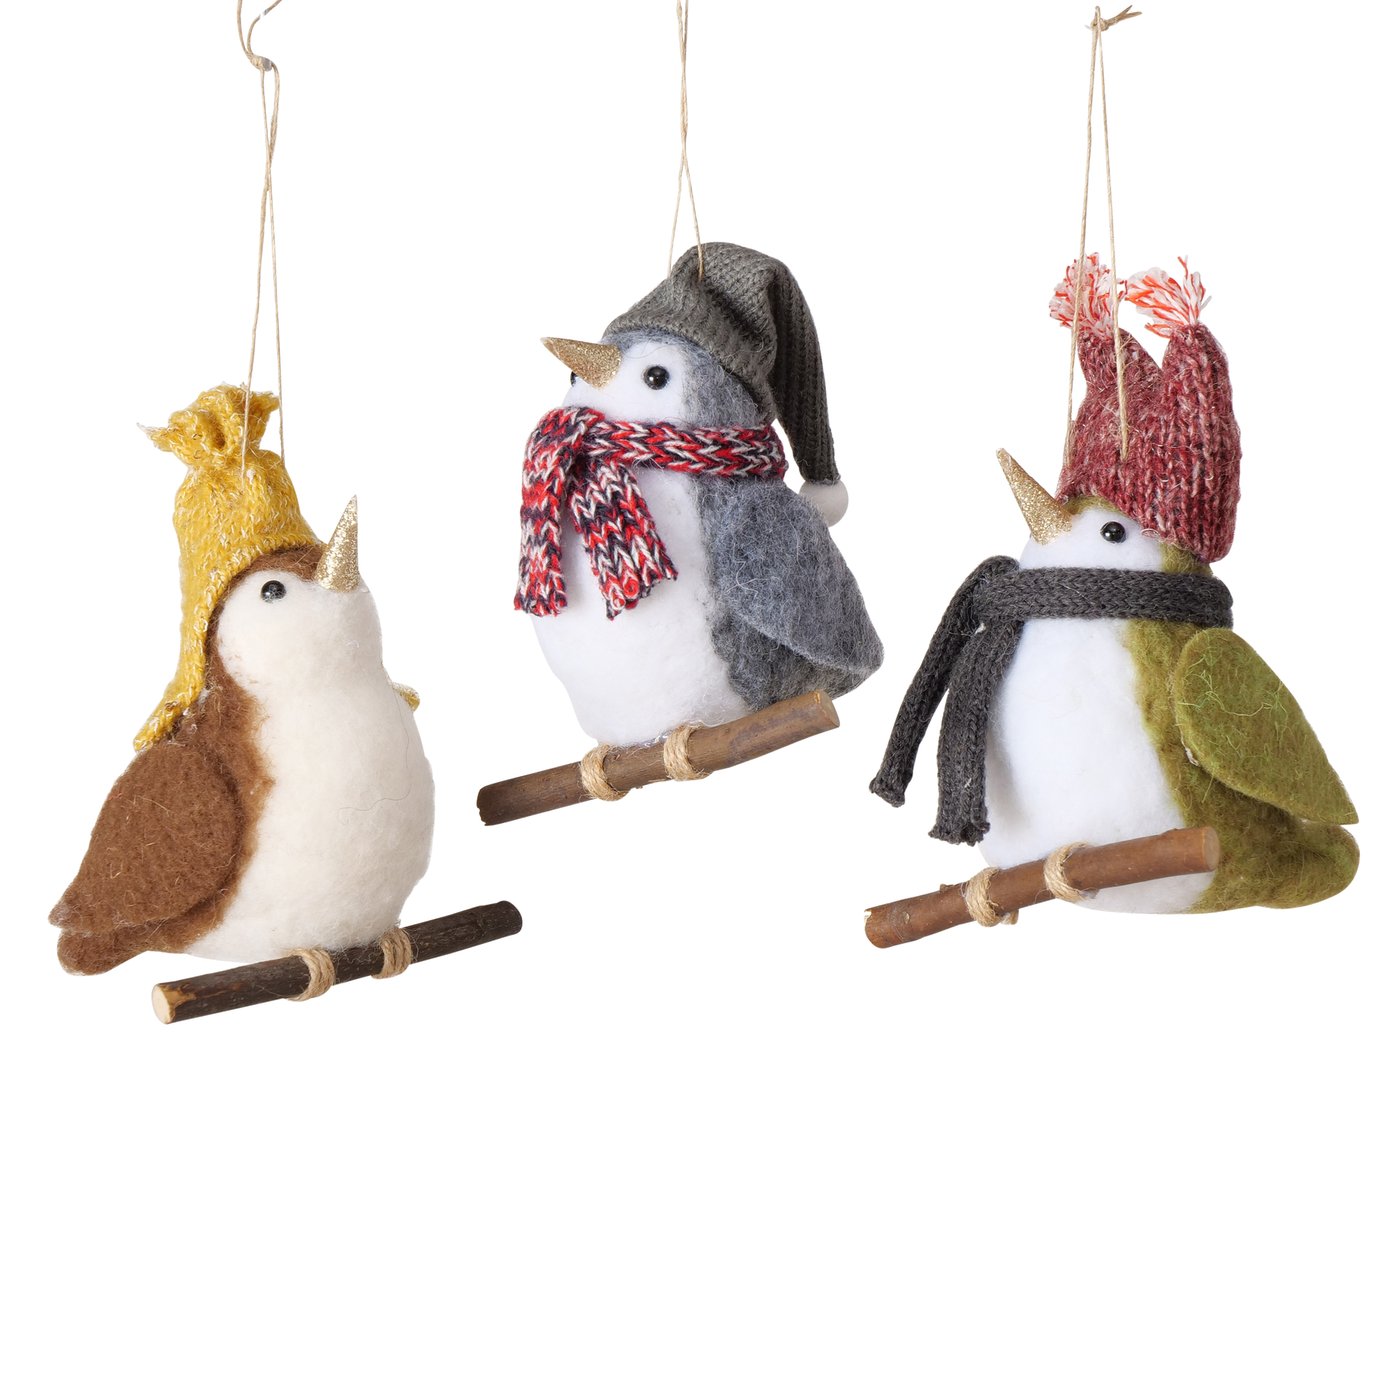 &Quirky Christmas Hanging Bird On Stick : Red Hat, Grey Hat or Mustard Hat